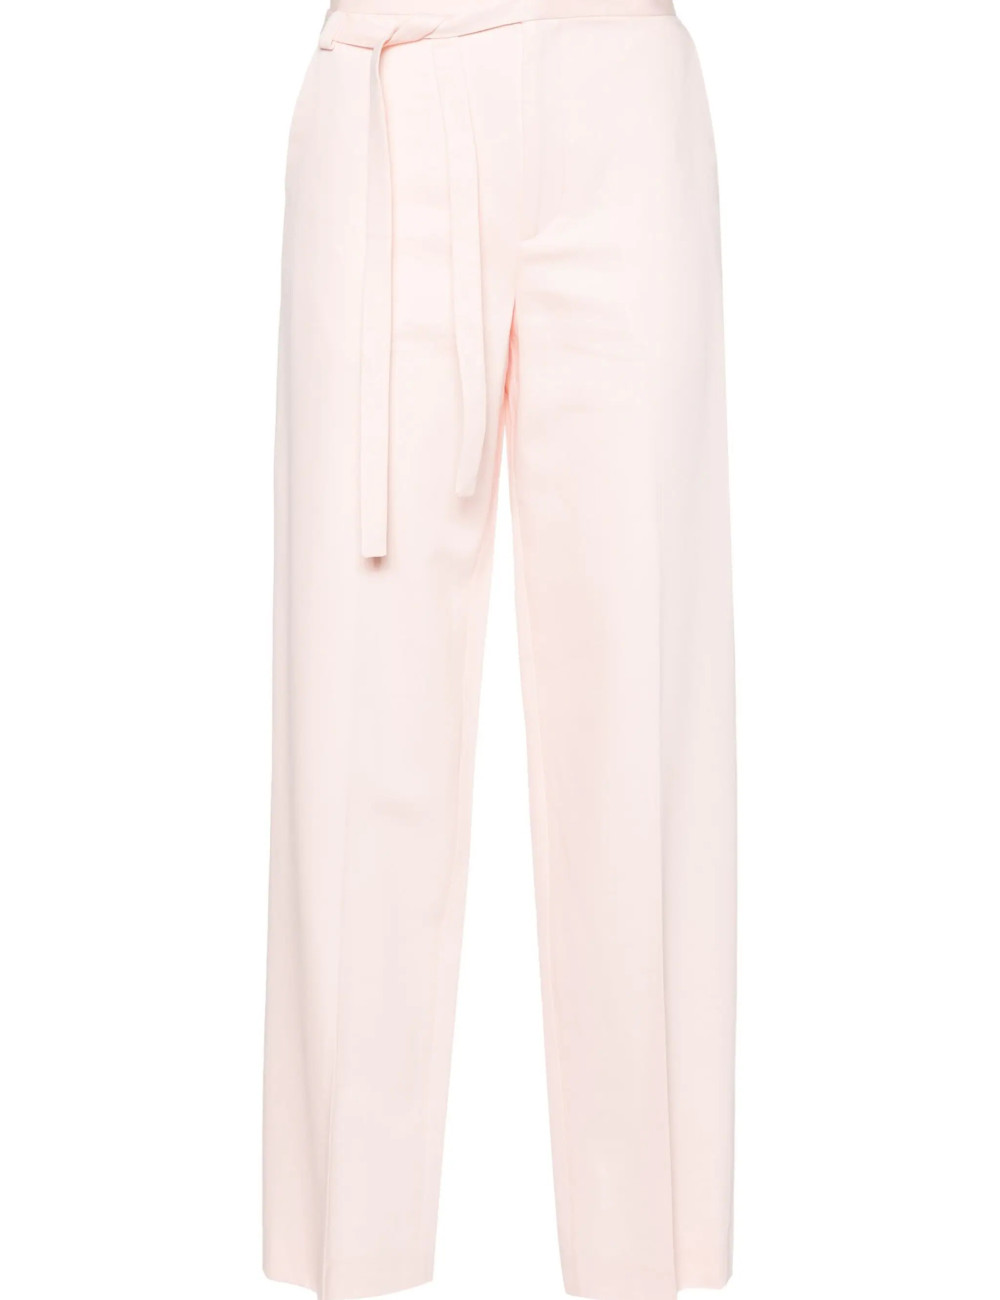 Women's Tailored Trousers